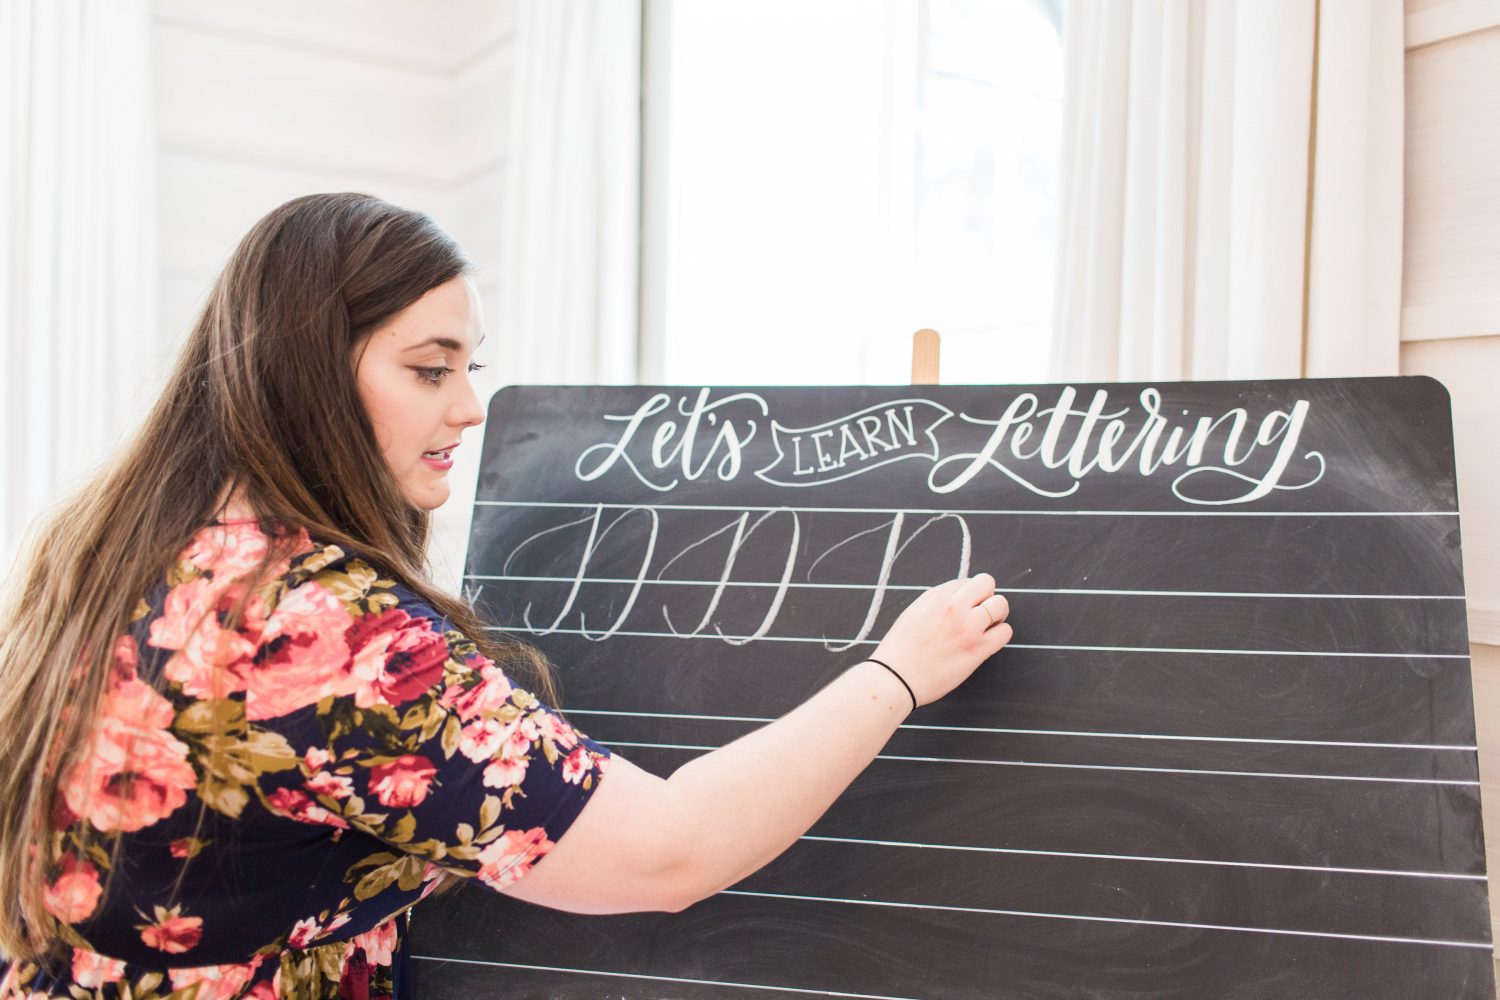 Find out how @paigefirnberg teaches brush lettering workshops using @tombowusa pens!